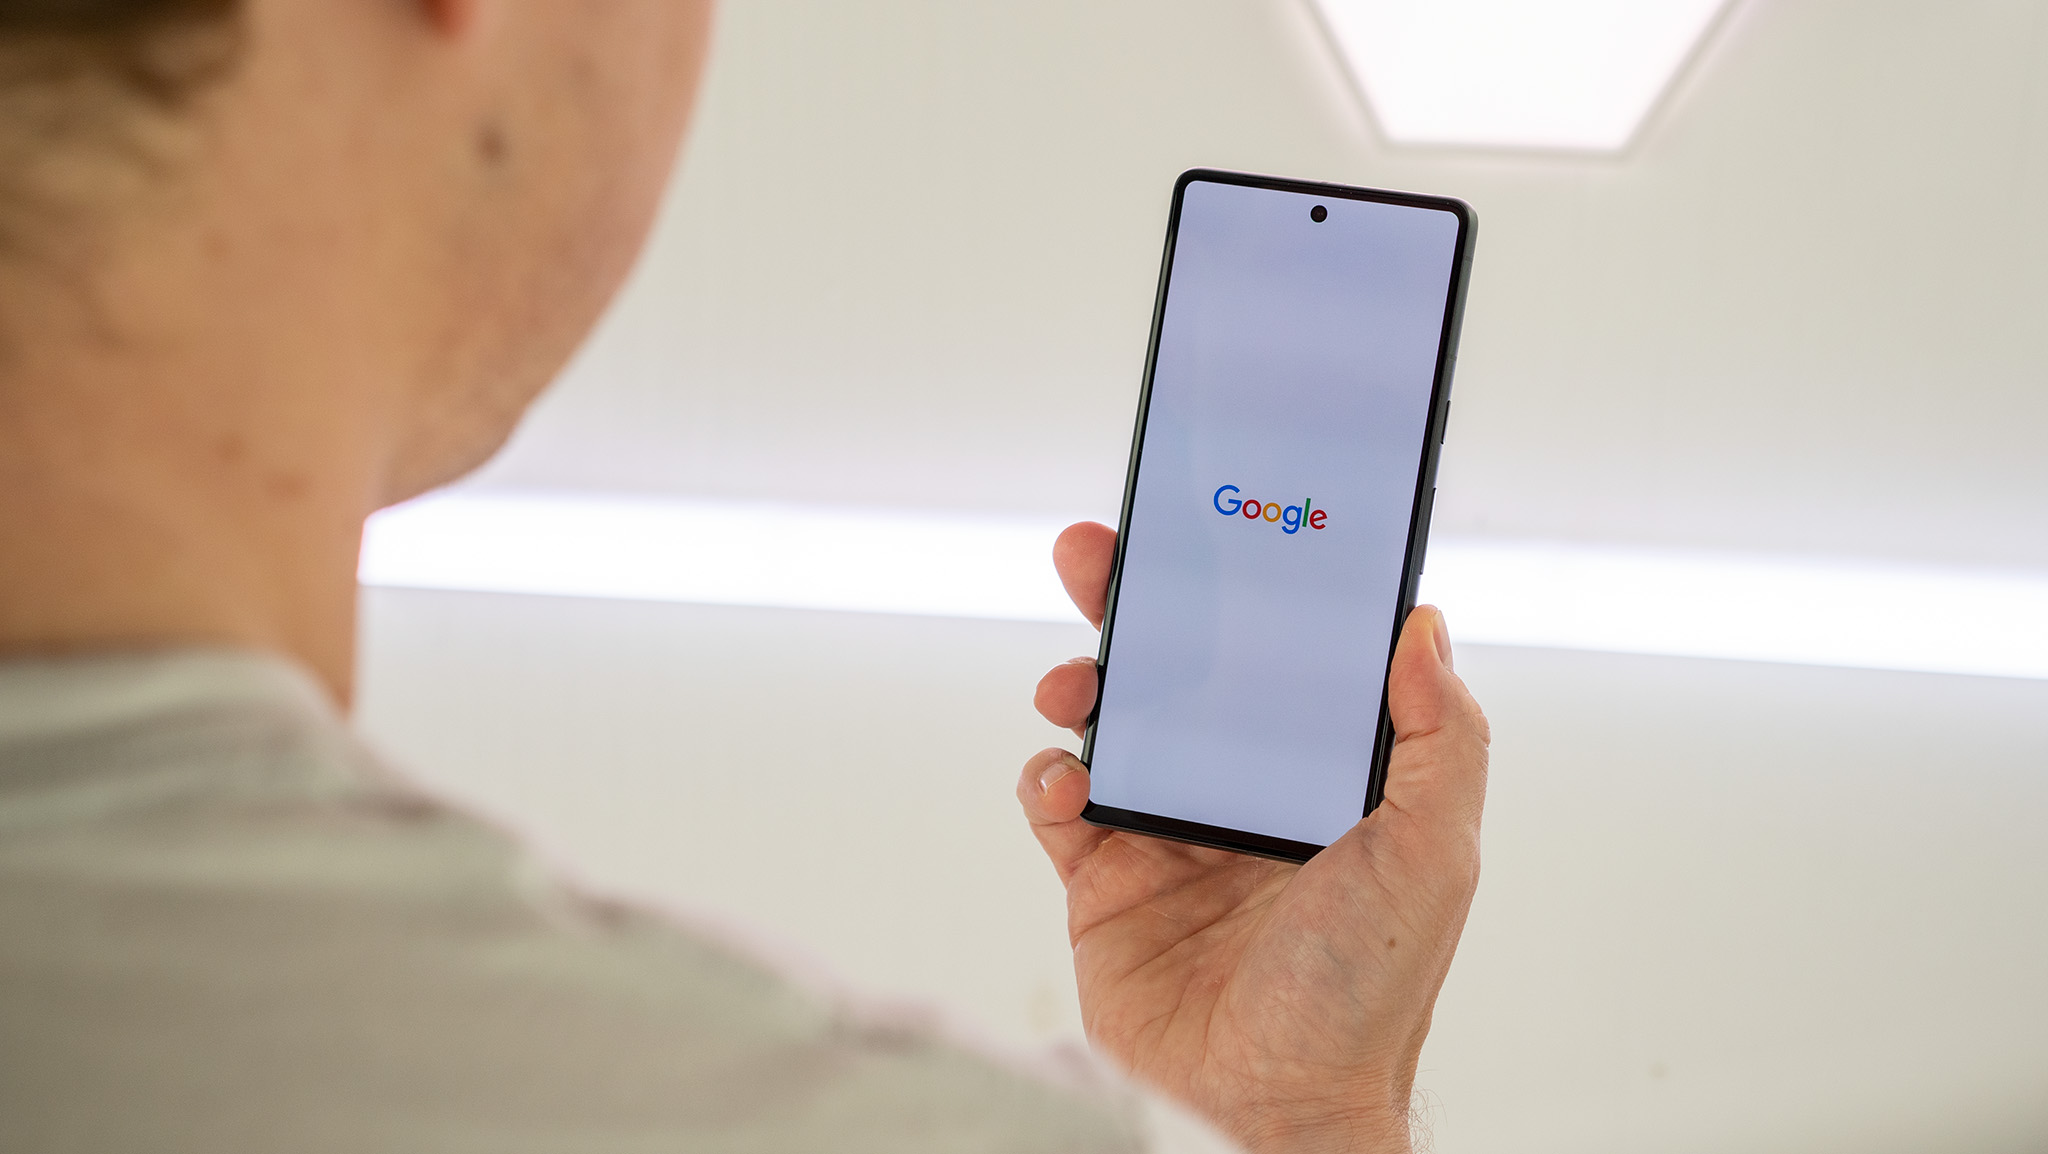 Troubleshooting LG Google Pixel 4 Power Issues